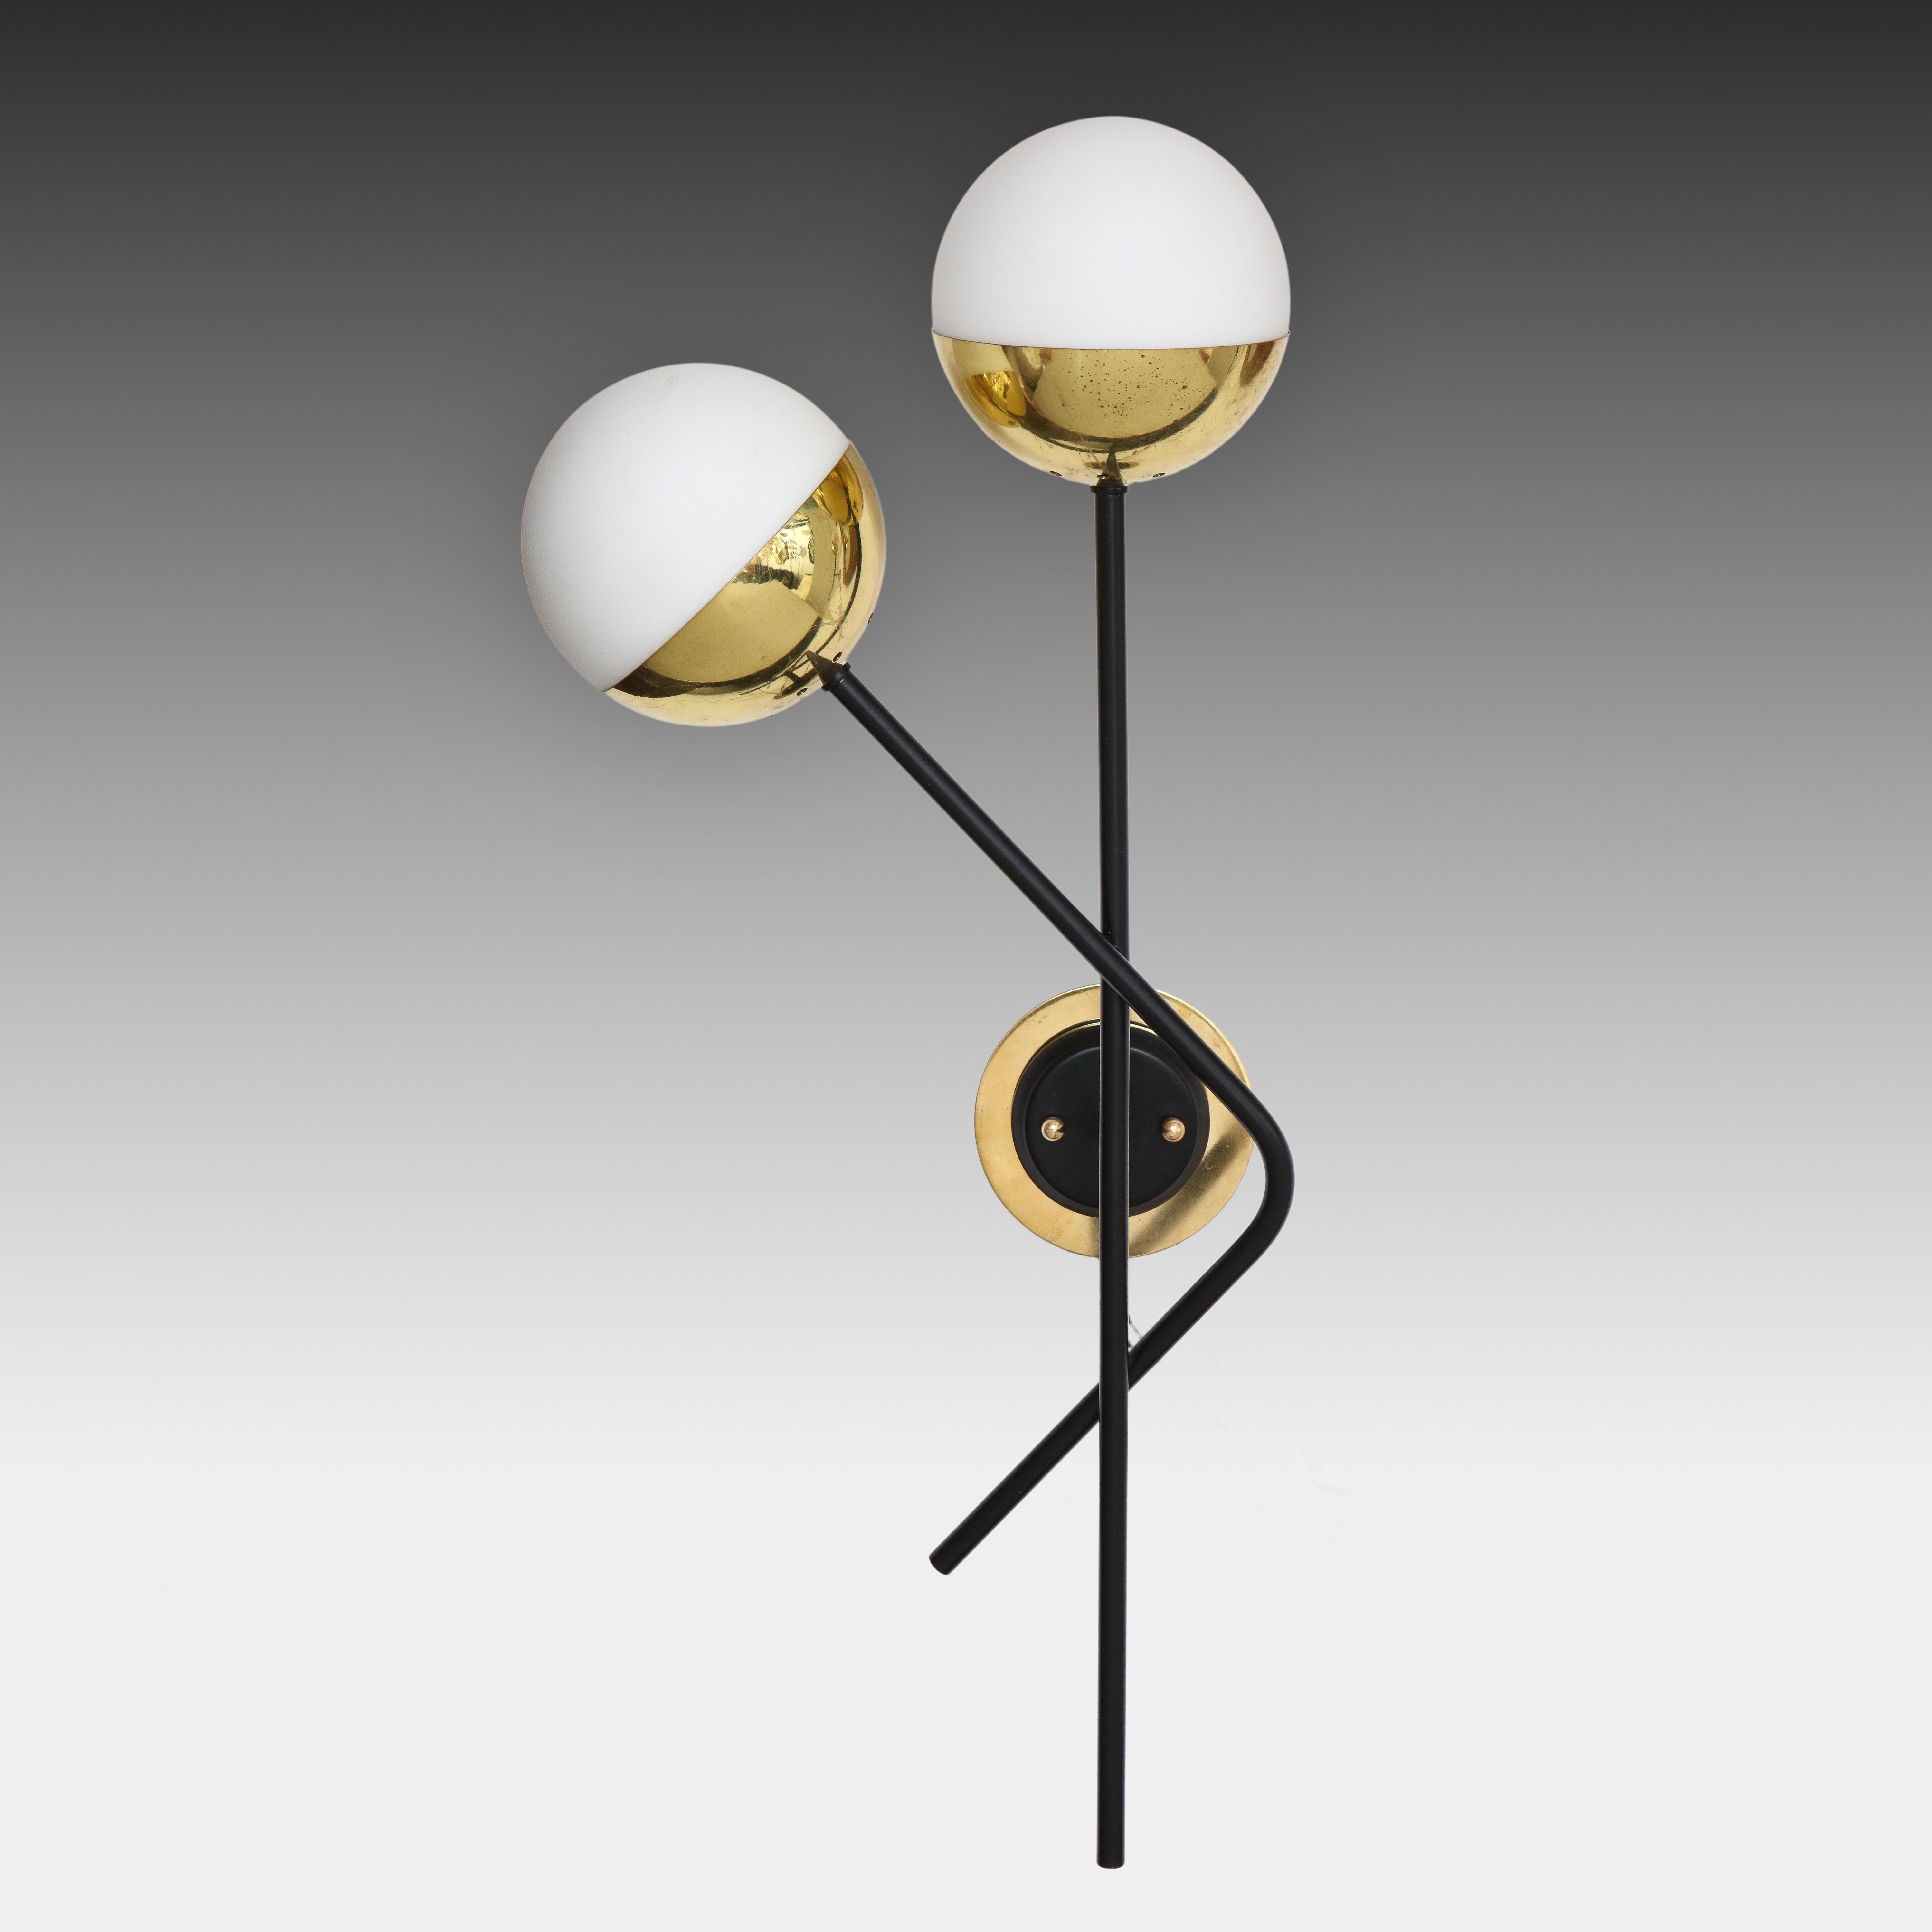 Stilnovo modernist pair of two-light sconces with opaque or frosted glass shades held in brass fittings suspended on black painted metal rods. These architectural wall lights are a classic Stilnovo design with striking contrasting signature colors